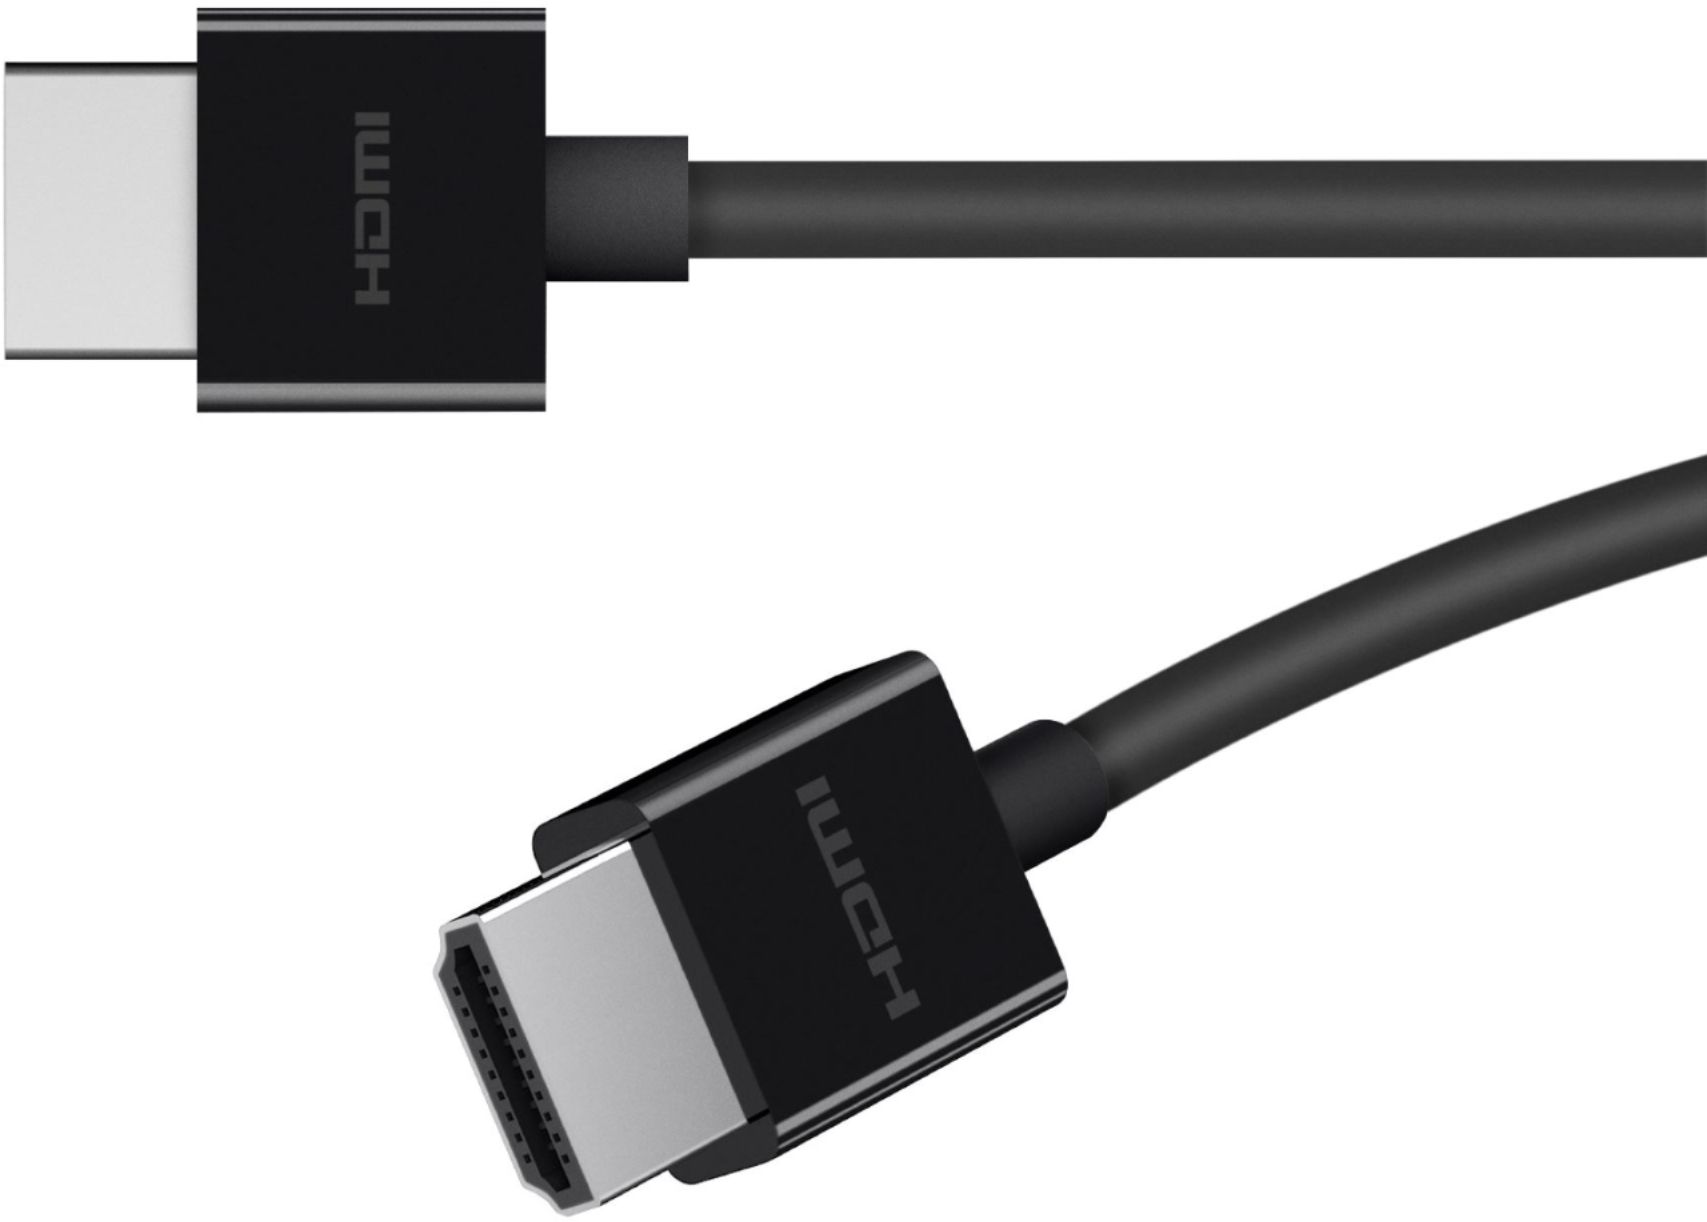 1 m High Speed True 4K HDMI Cable with Ethernet - 2L-7D01H, ATEN HDMI Cables